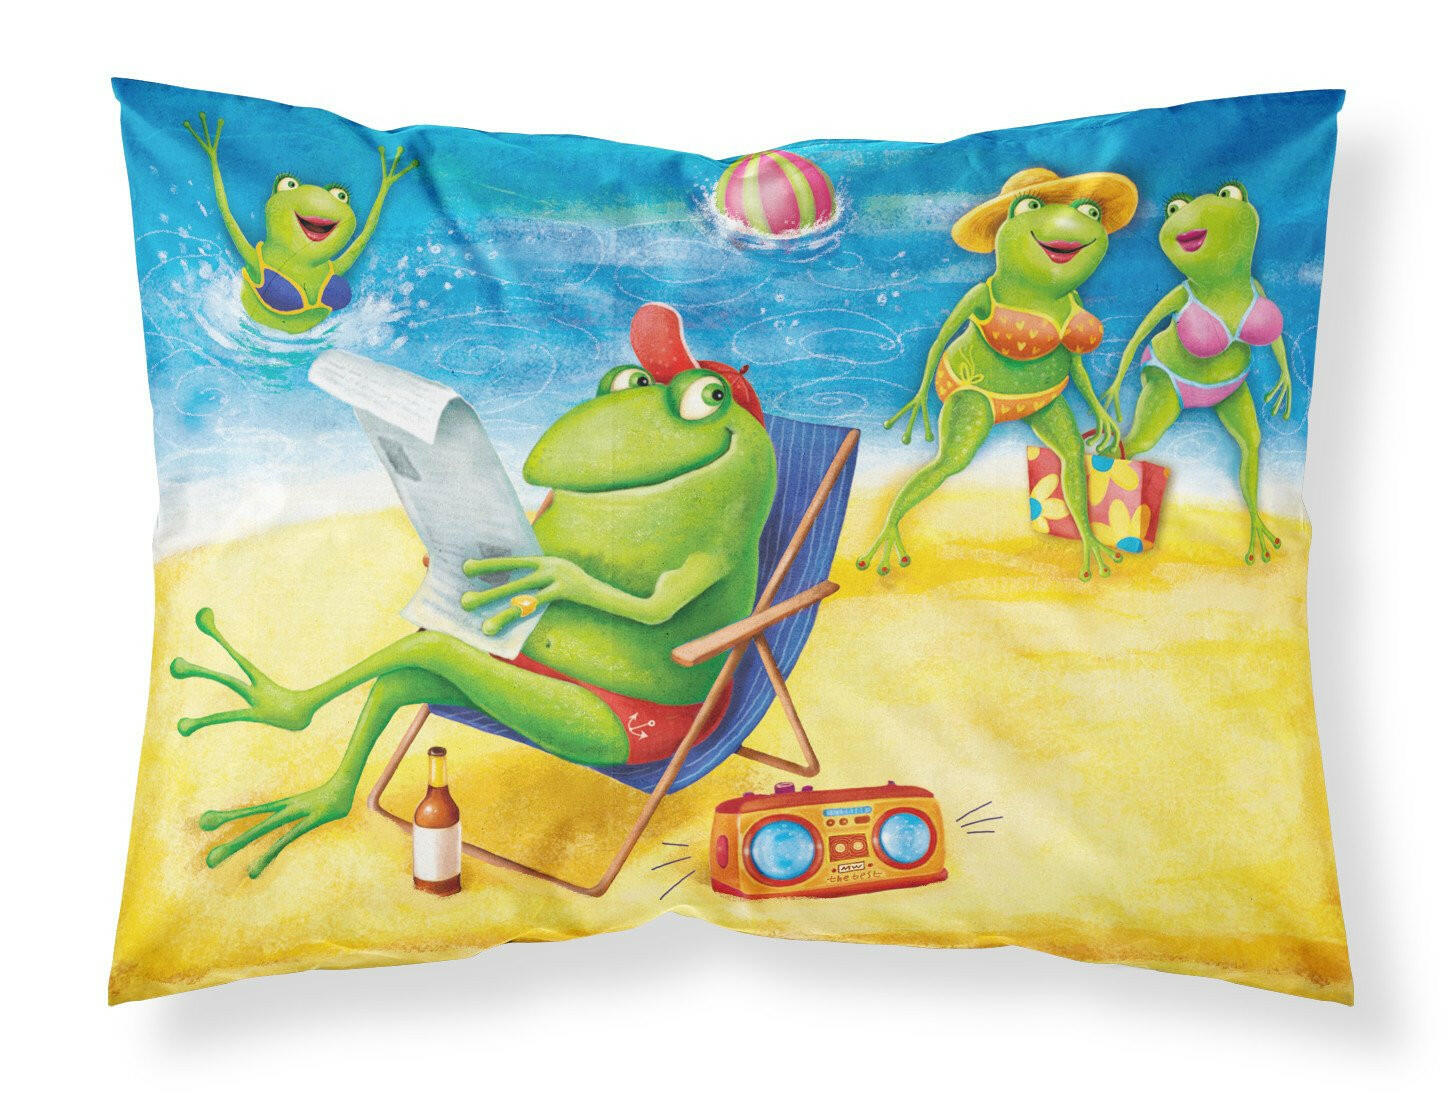 Frogs on the Beach Fabric Standard Pillowcase APH0080PILLOWCASE by Caroline's Treasures